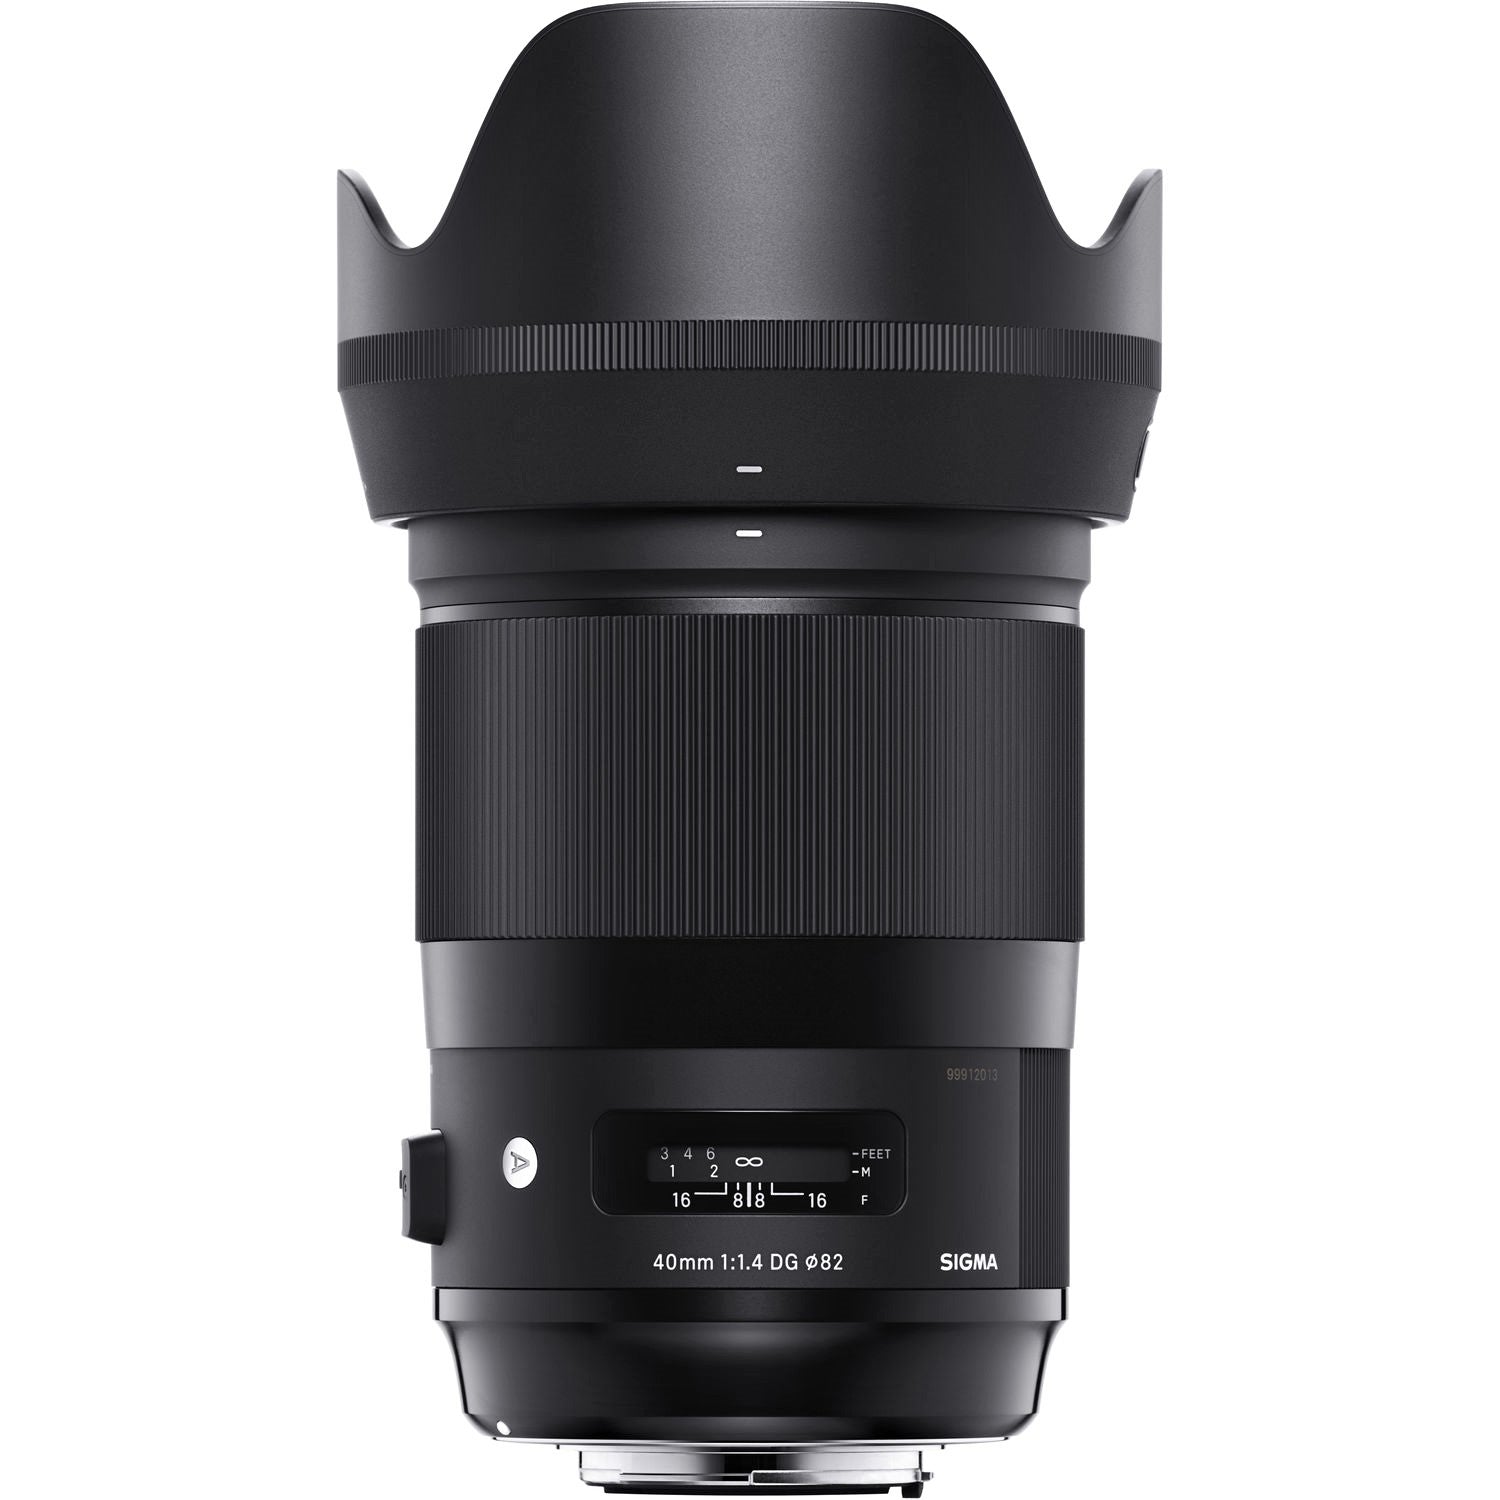 Sigma 40mm F1.4 DG HSM Art Lens for Leica L with Attached Lens Hood on the Top